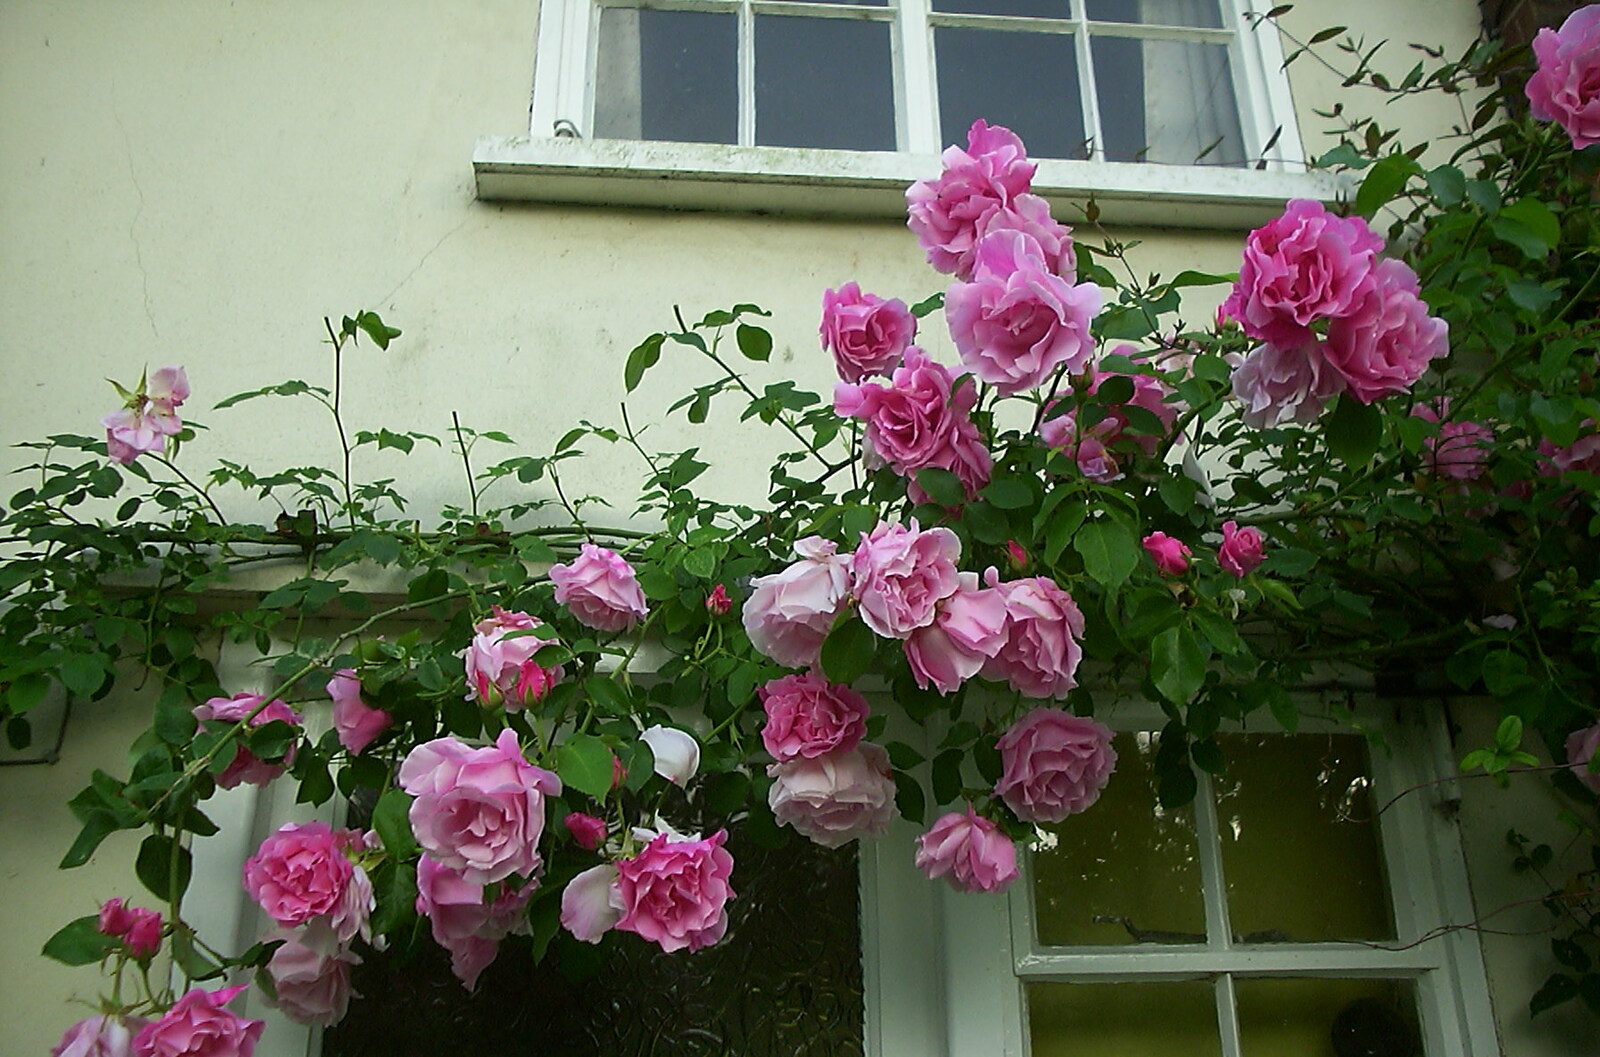 The rose is in full bloom from Mother and Mike Visit, and Cat Photos, Brome, Suffolk - 1st September 2002